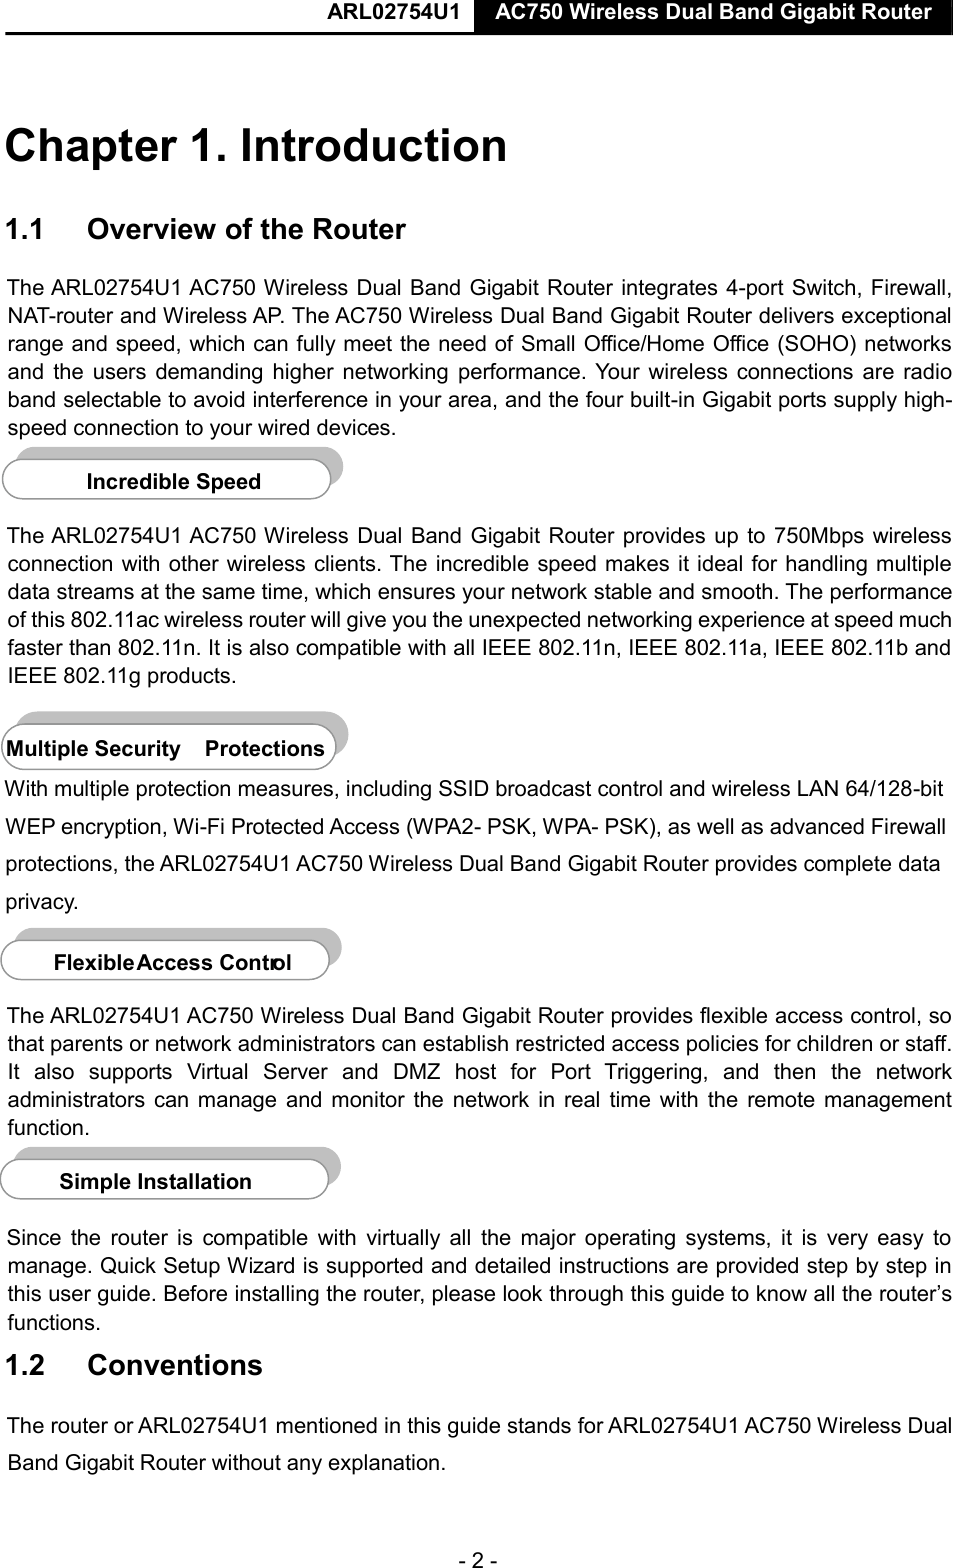  ARL02754U1  AC750 Wireless Dual Band Gigabit Router  - 2 -    Chapter 1. Introduction  1.1  Overview of the Router  The ARL02754U1 AC750 Wireless Dual Band Gigabit Router integrates 4-port Switch, Firewall, NAT-router and Wireless AP. The AC750 Wireless Dual Band Gigabit Router delivers exceptional range and speed, which can fully meet the need of Small Office/Home Office (SOHO) networks and the  users demanding higher networking  performance. Your wireless  connections are radio band selectable to avoid interference in your area, and the four built-in Gigabit ports supply high-speed connection to your wired devices.    The ARL02754U1 AC750 Wireless Dual Band Gigabit Router provides up to 750Mbps wireless connection with other wireless clients. The incredible speed makes it ideal for handling multiple data streams at the same time, which ensures your network stable and smooth. The performance of this 802.11ac wireless router will give you the unexpected networking experience at speed much faster than 802.11n. It is also compatible with all IEEE 802.11n, IEEE 802.11a, IEEE 802.11b and IEEE 802.11g products.  Multiple Security   Protections  With multiple protection measures, including SSID broadcast control and wireless LAN 64/128-bit WEP encryption, Wi-Fi Protected Access (WPA2- PSK, WPA- PSK), as well as advanced Firewall protections, the ARL02754U1 AC750 Wireless Dual Band Gigabit Router provides complete data privacy.    The ARL02754U1 AC750 Wireless Dual Band Gigabit Router provides flexible access control, so that parents or network administrators can establish restricted access policies for children or staff. It  also  supports  Virtual  Server  and  DMZ  host  for  Port  Triggering,  and  then  the  network administrators can manage and monitor the network in real time with the  remote management function.    Since  the router  is  compatible  with virtually all  the major operating  systems, it  is  very  easy to manage. Quick Setup Wizard is supported and detailed instructions are provided step by step in this user guide. Before installing the router, please look through this guide to know all the router’s functions.  1.2  Conventions  The router or ARL02754U1 mentioned in this guide stands for ARL02754U1 AC750 Wireless Dual Band Gigabit Router without any explanation.    Incredible Speed     F lexible   Access Contr ol     Simple Installatio n   